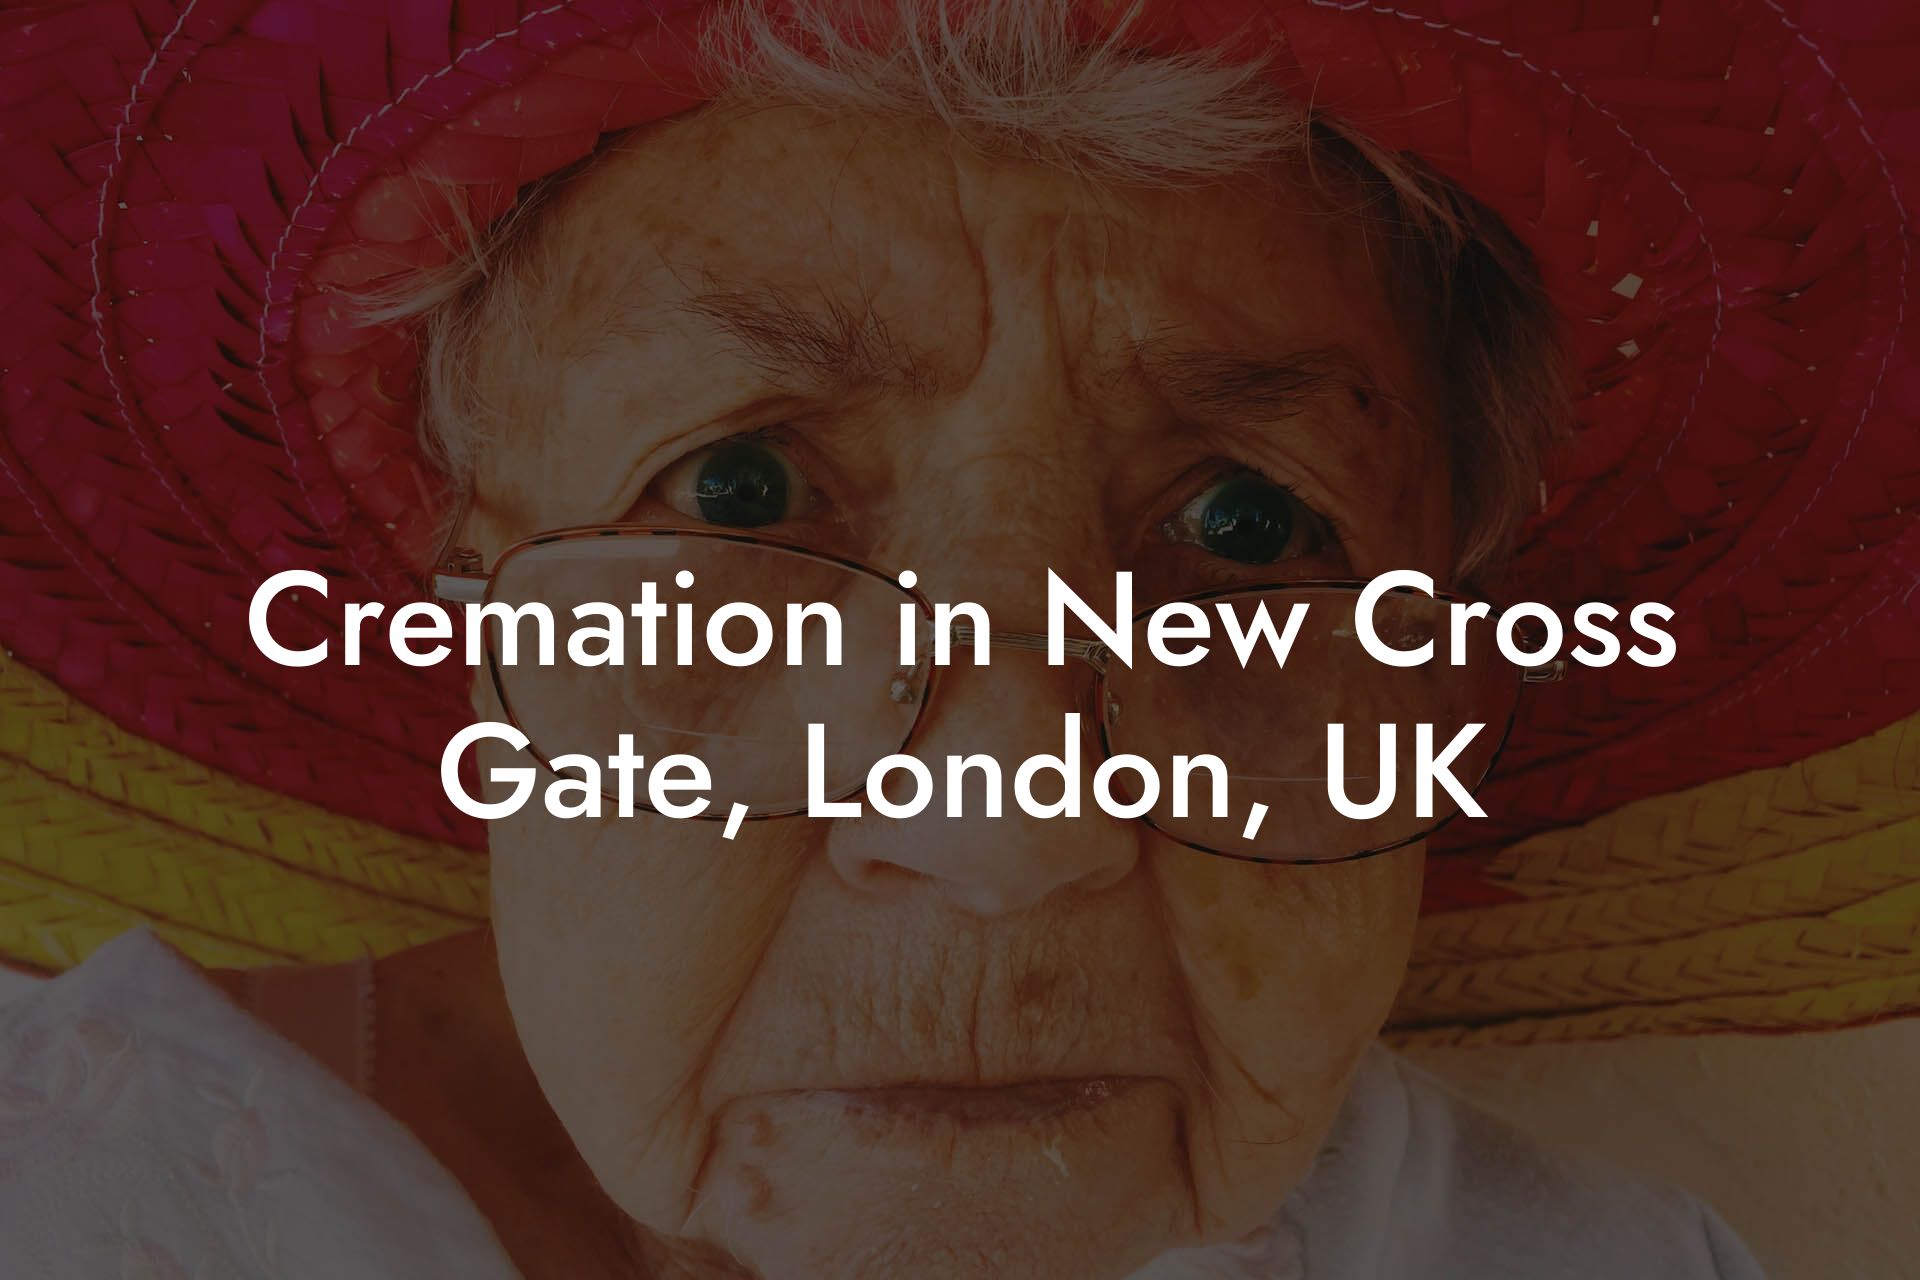 Cremation in New Cross Gate, London, UK